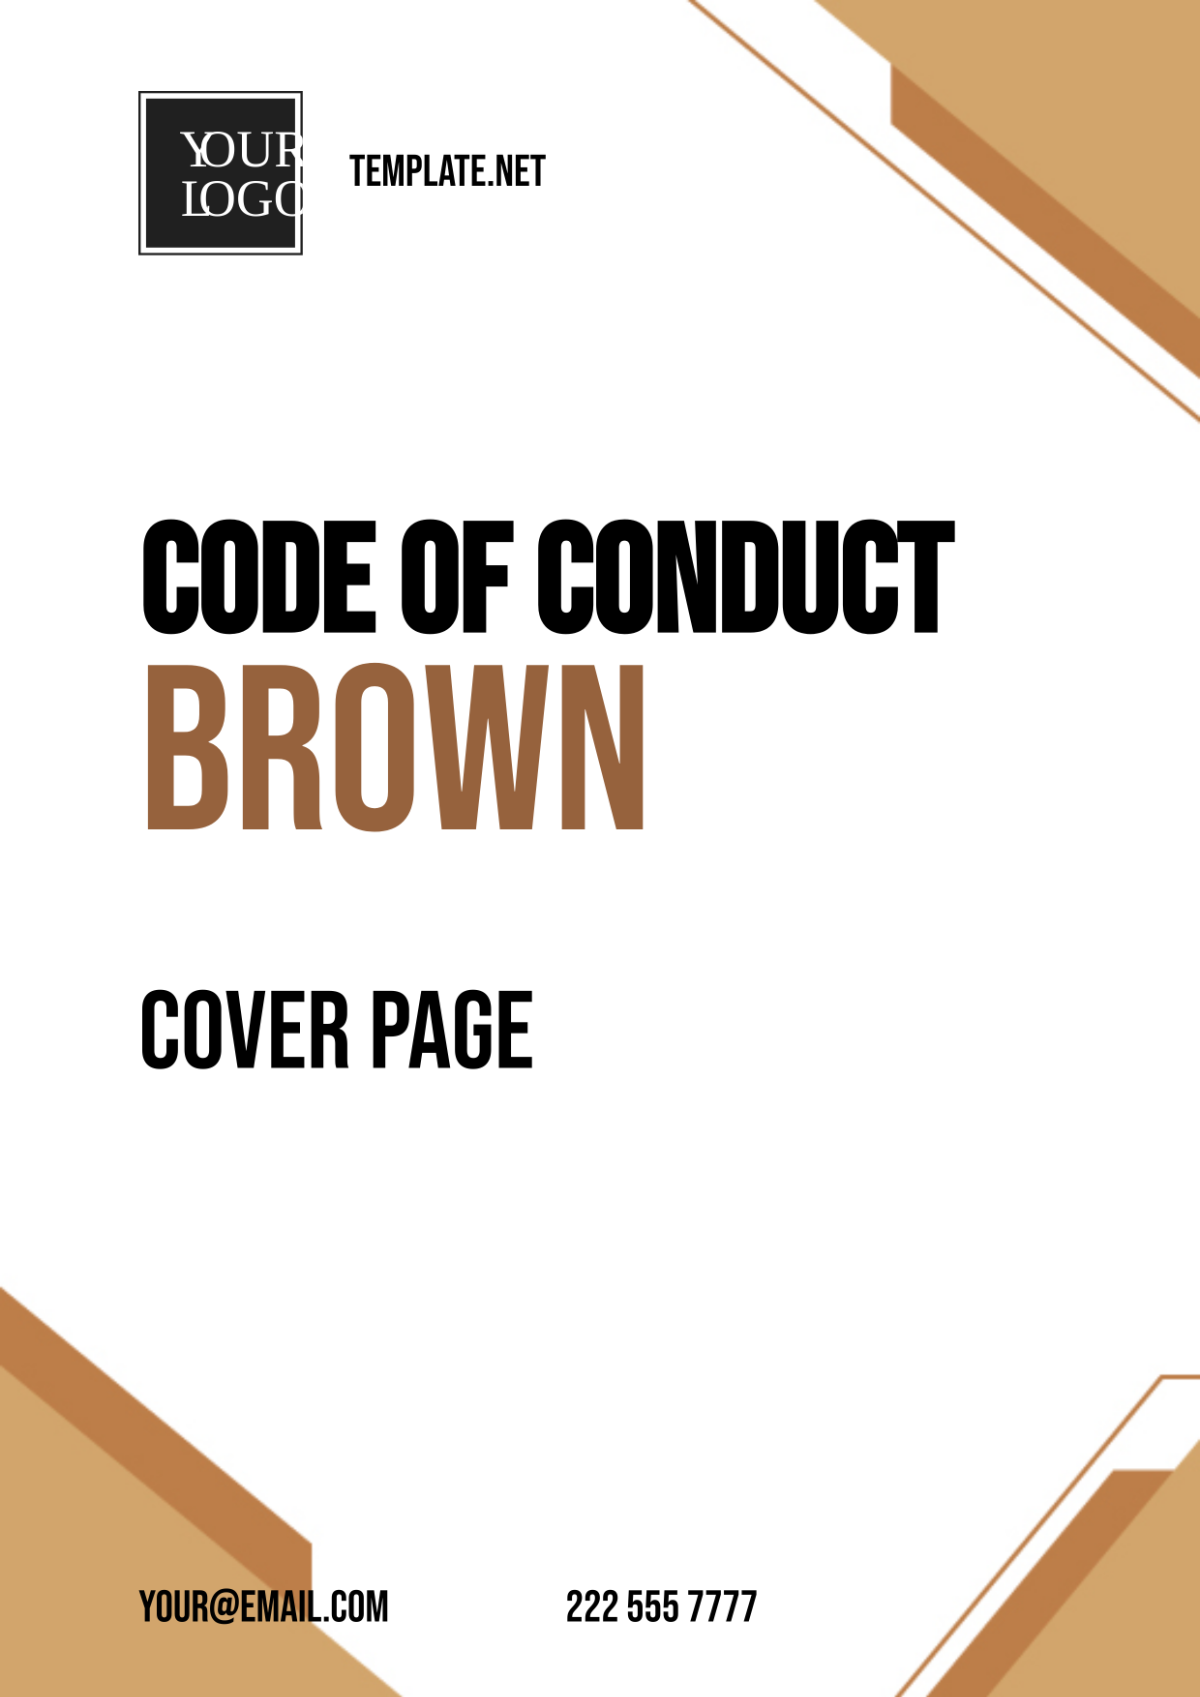 Free Code of Conduct Brown Cover Page Template